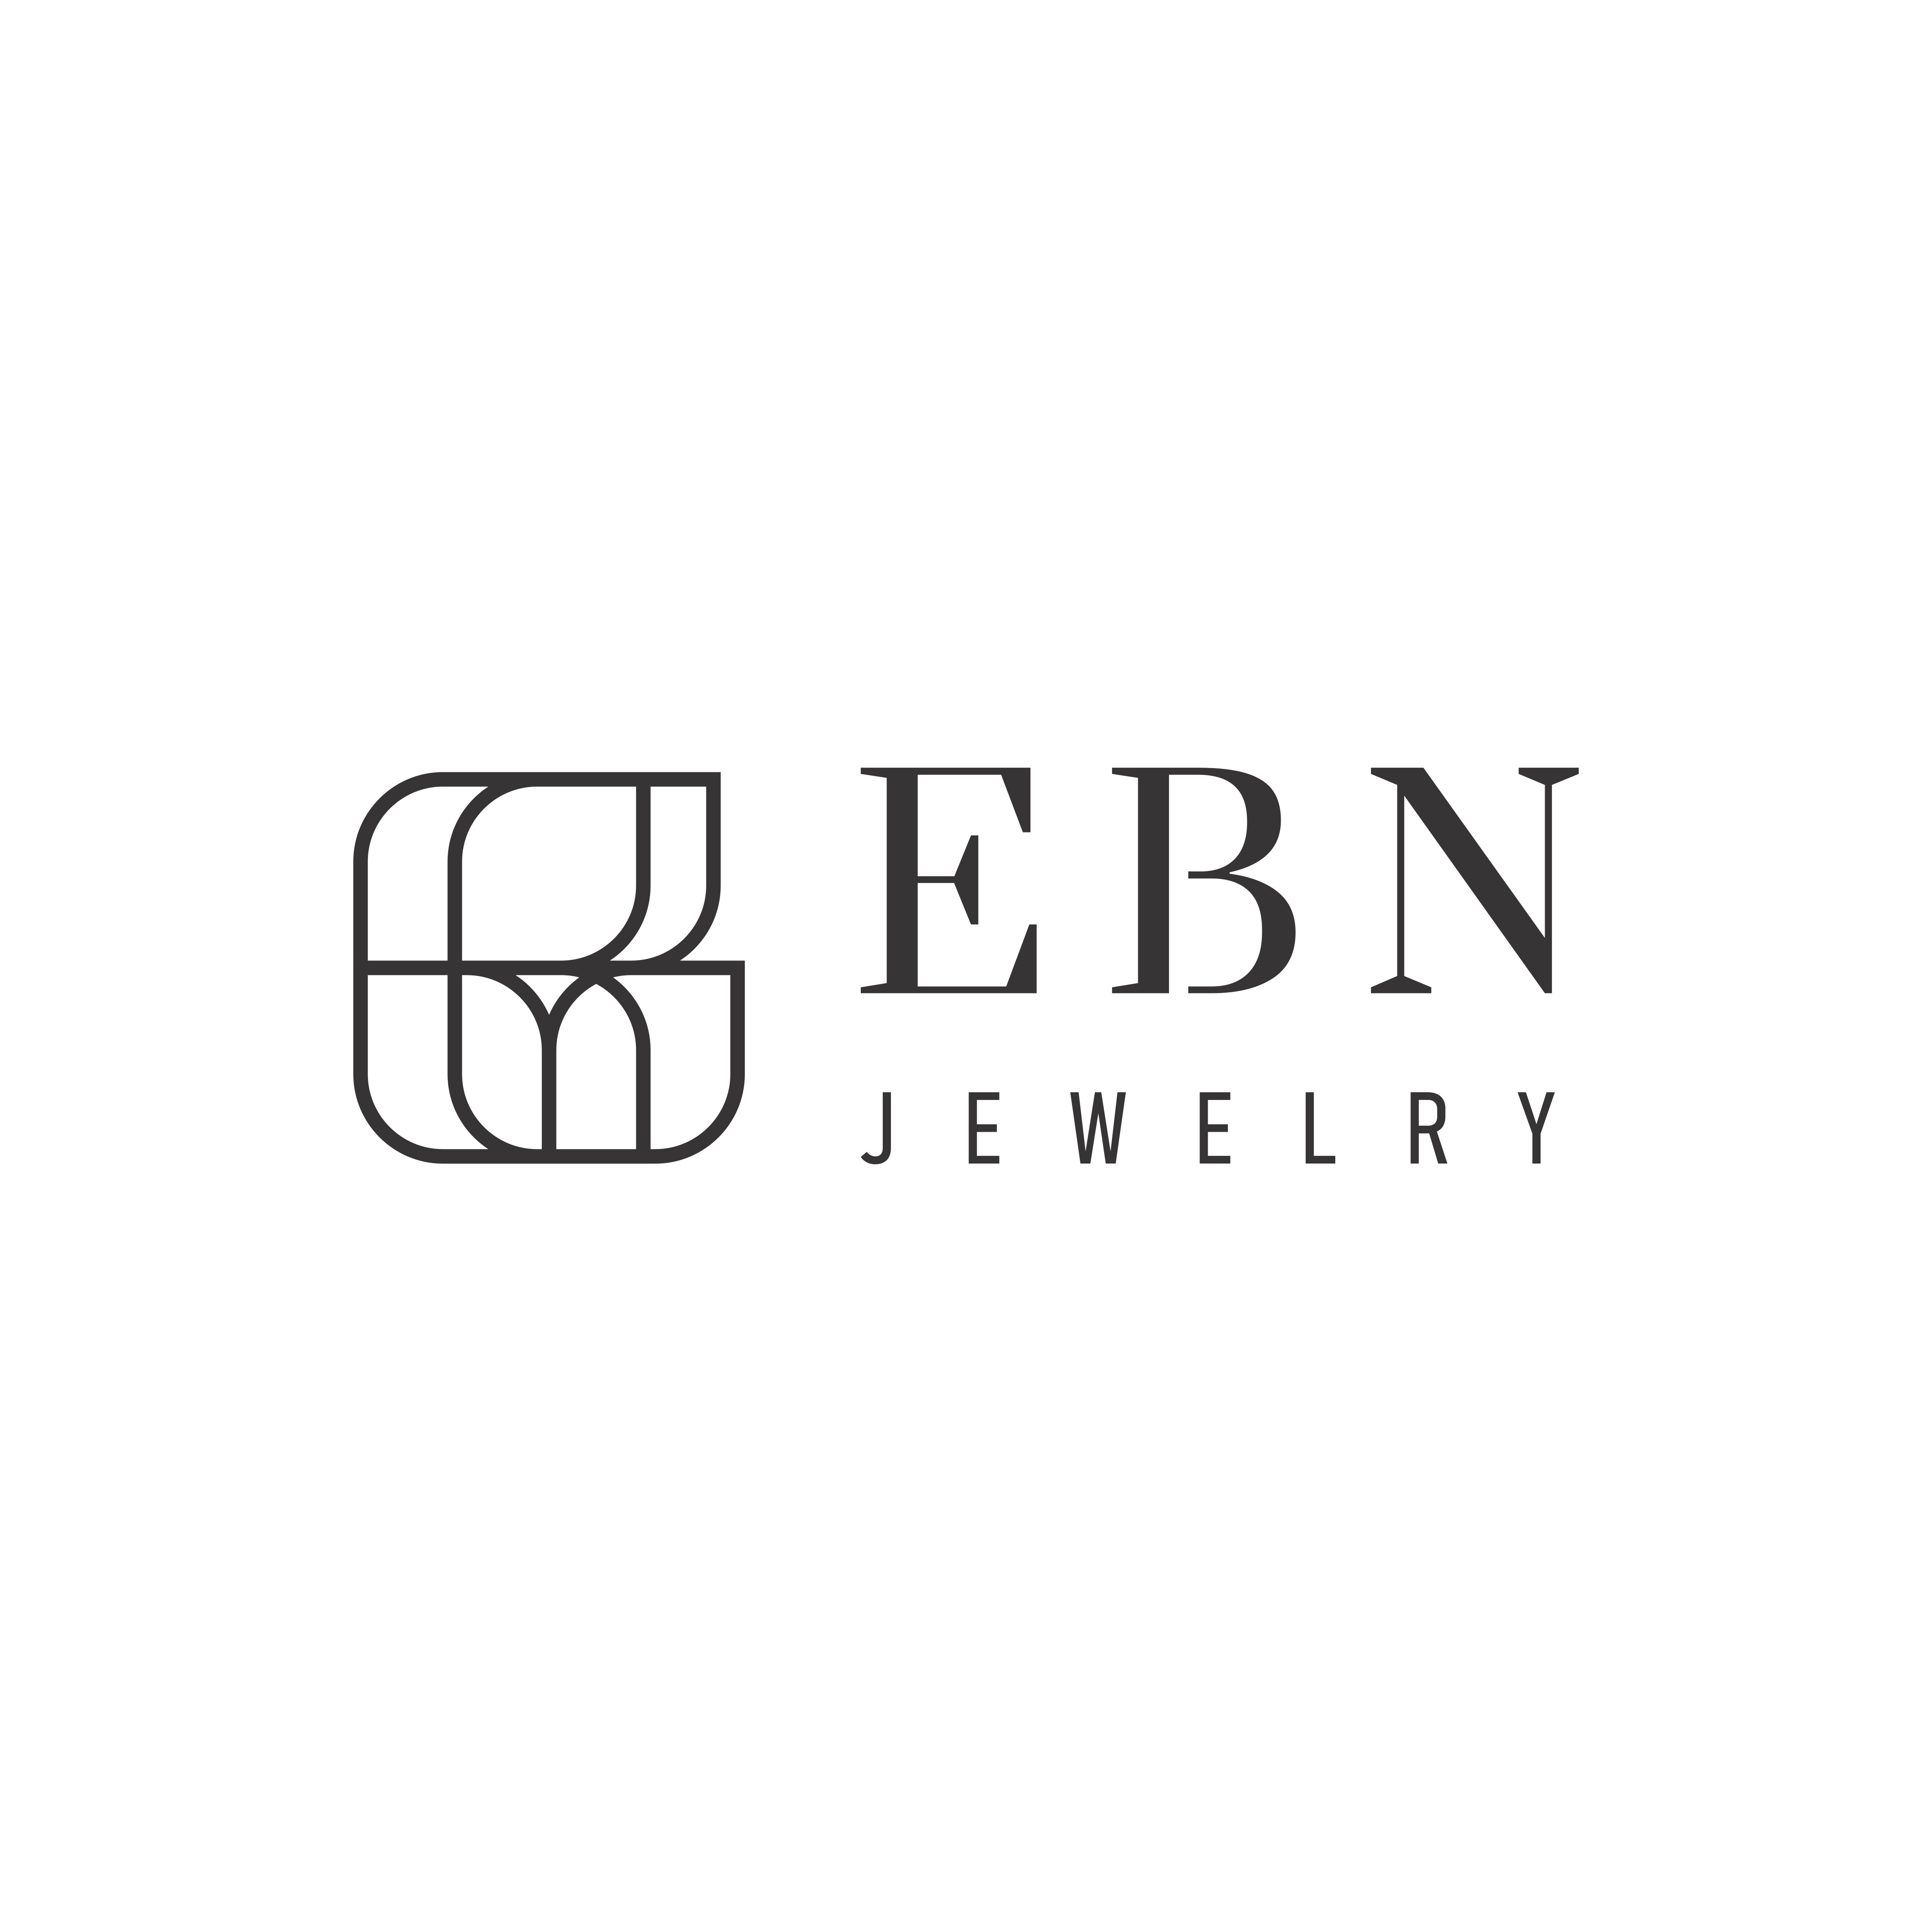 ebn jewelry | jewellery and watches in ahmedabad, gujarat, india